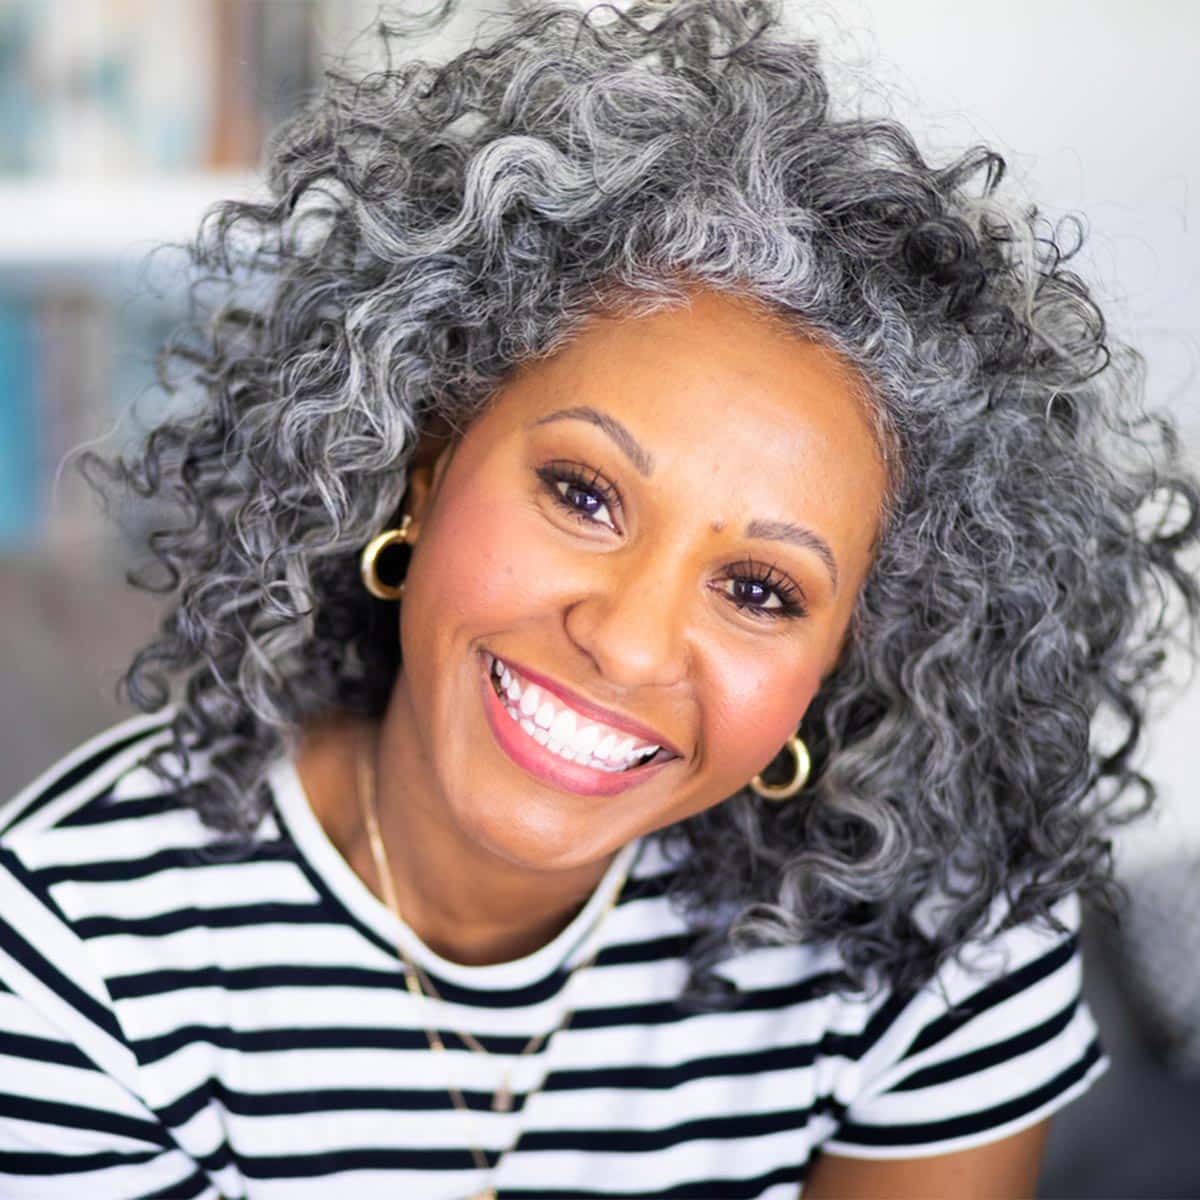 smiling woman with curly gray hair